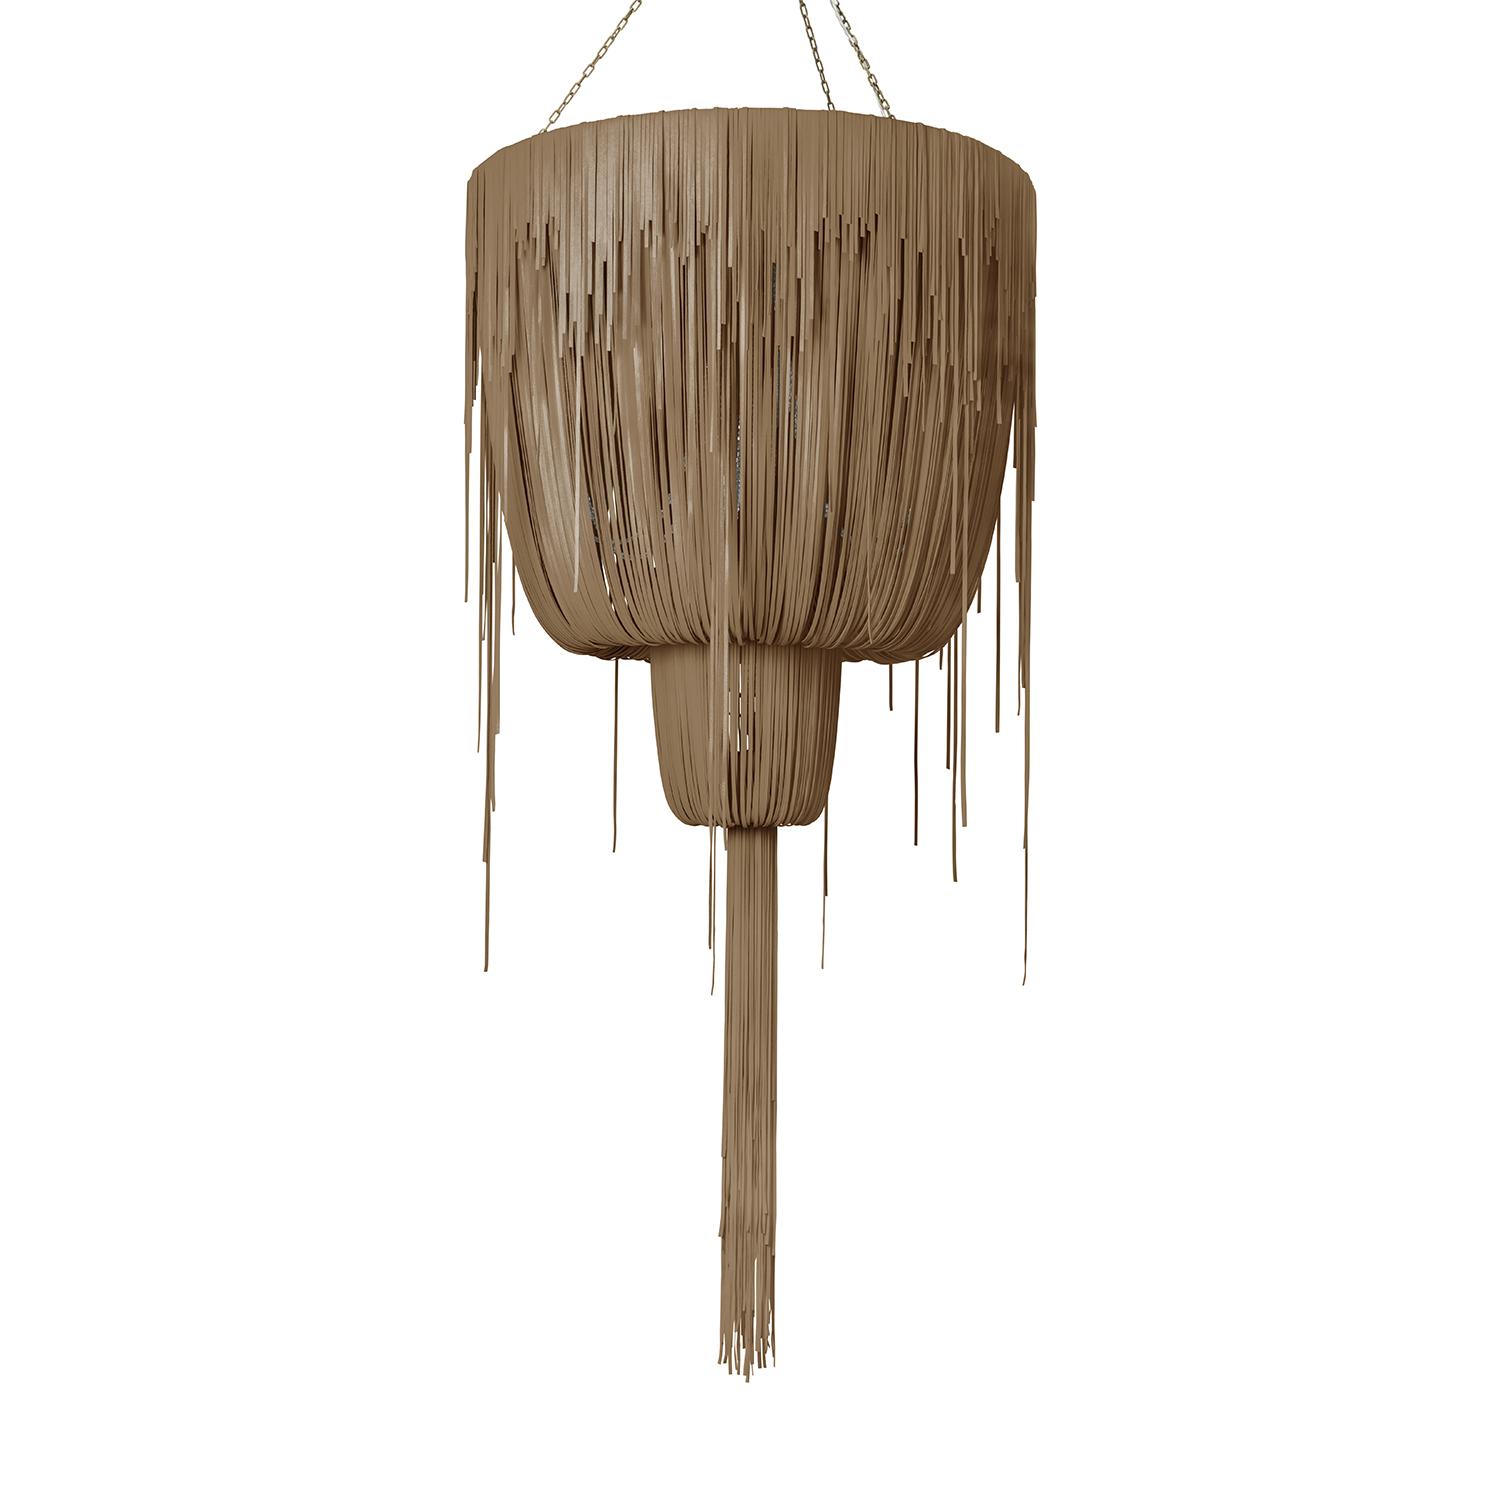 Large Round Double-Ball Urchin Leather Chandelier in Metallic Leather